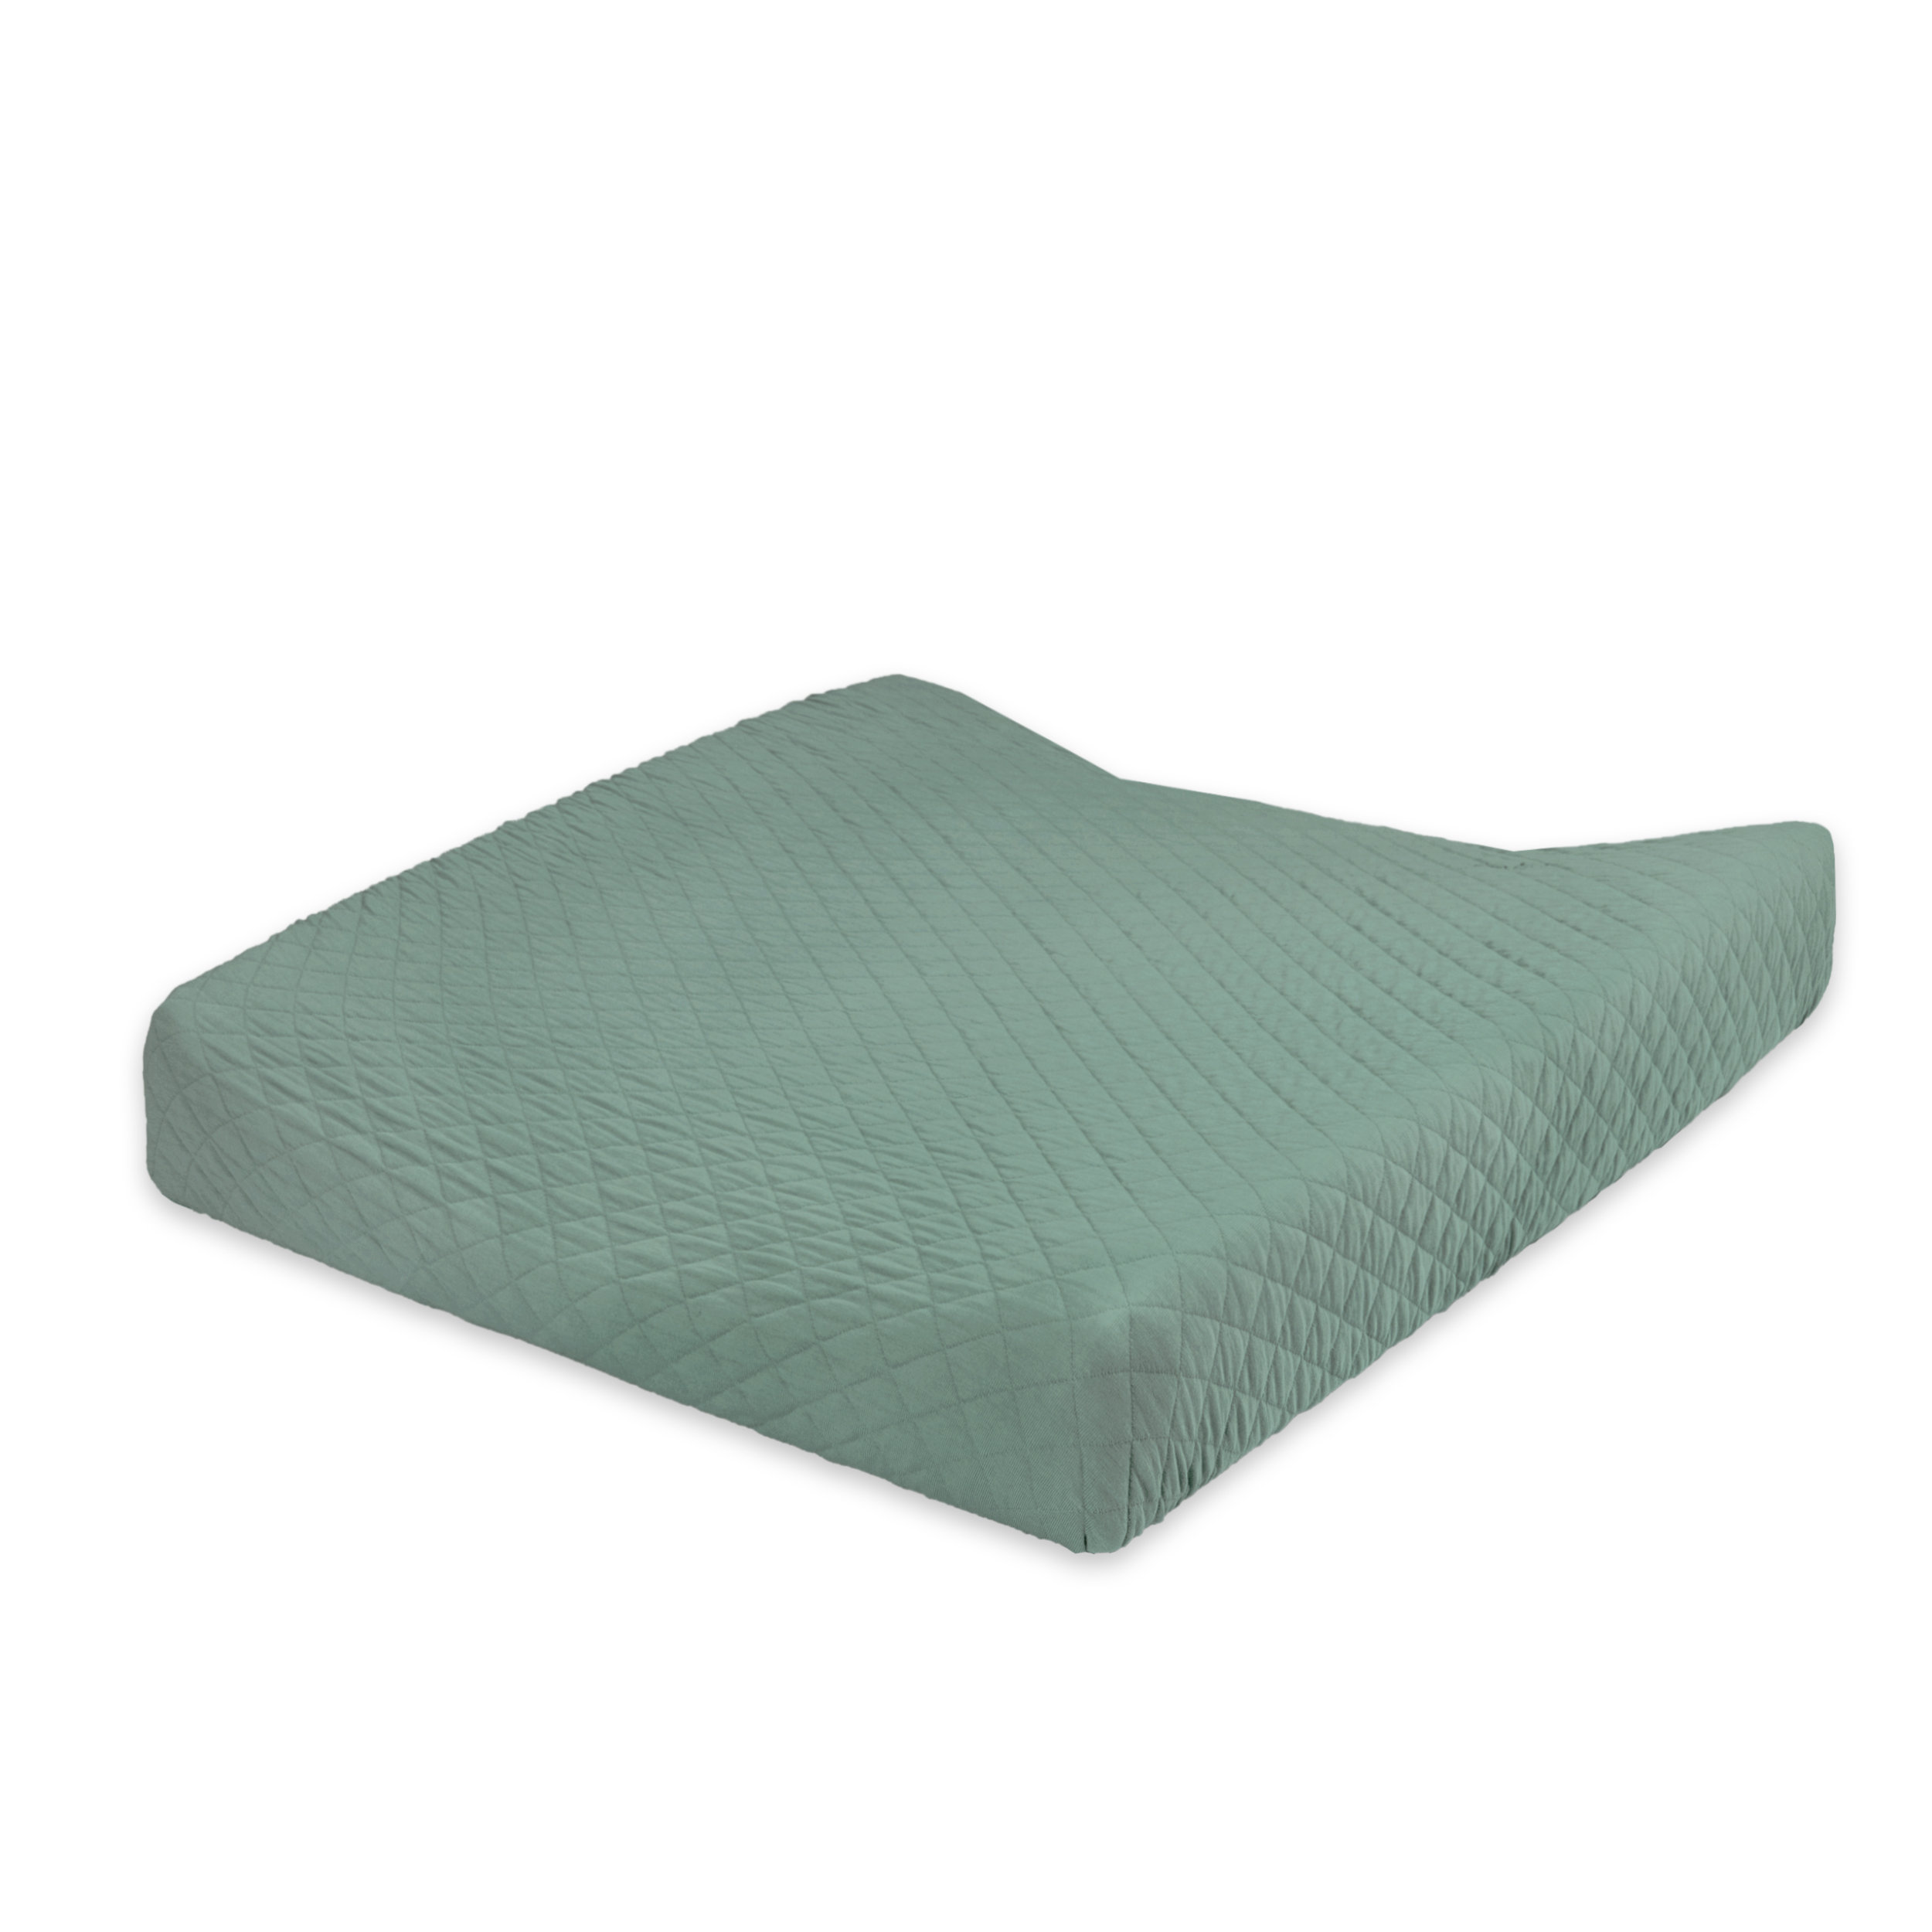 Waskussenhoes Pady quilted jersey 50x75cm QUILT Green